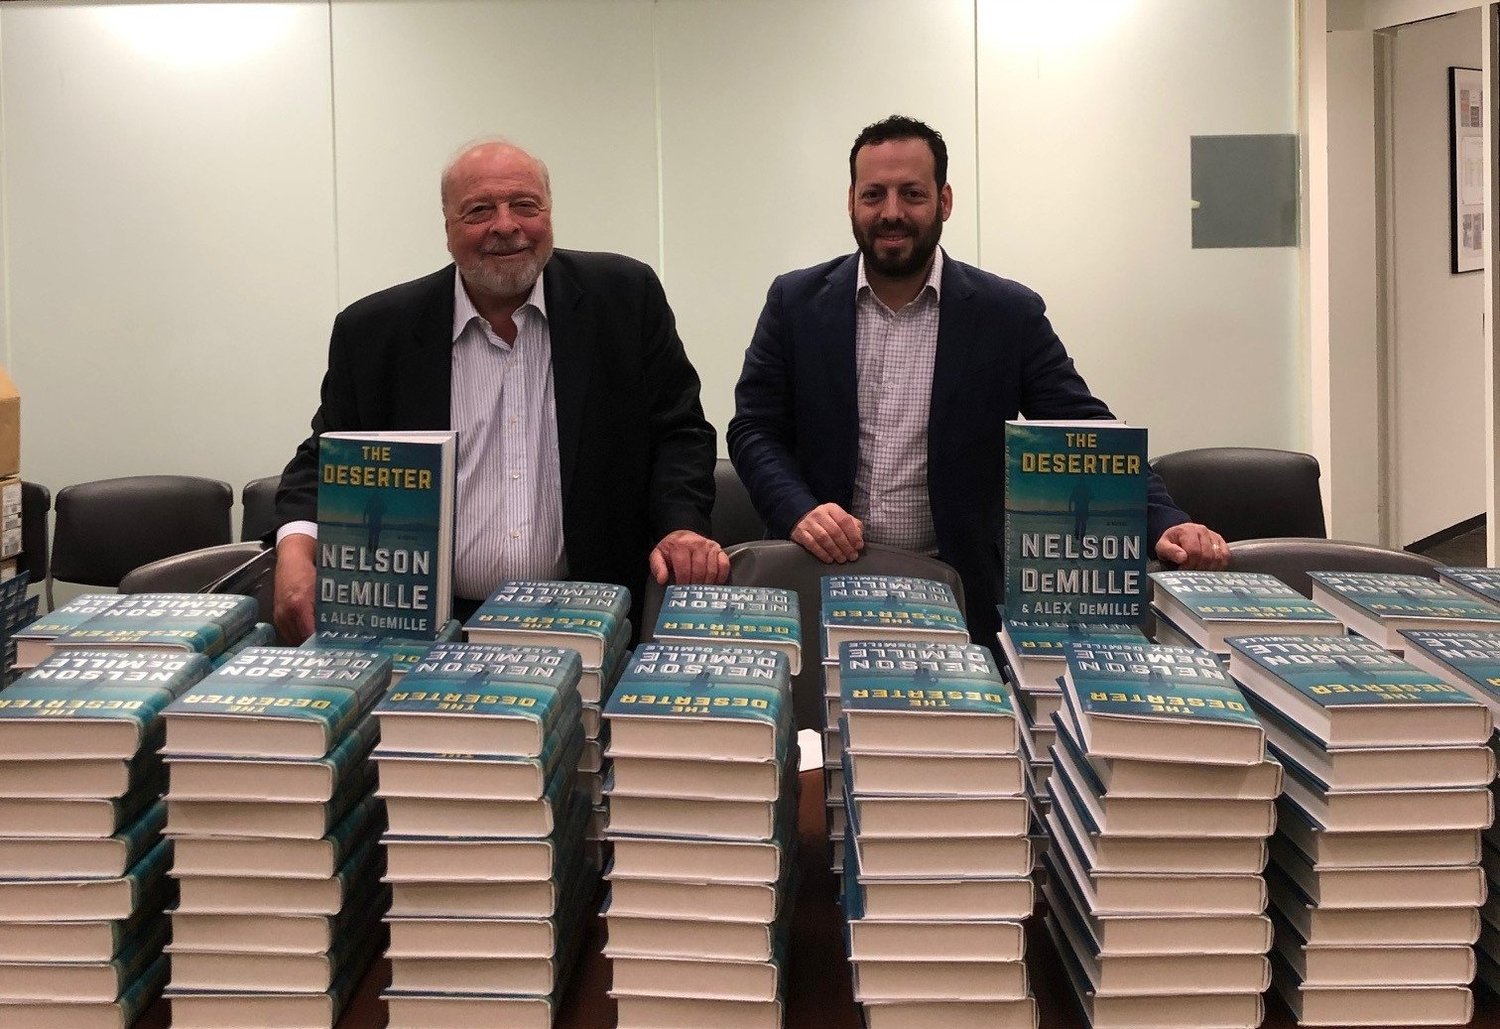 Nelson DeMille, left, and Alex DeMille